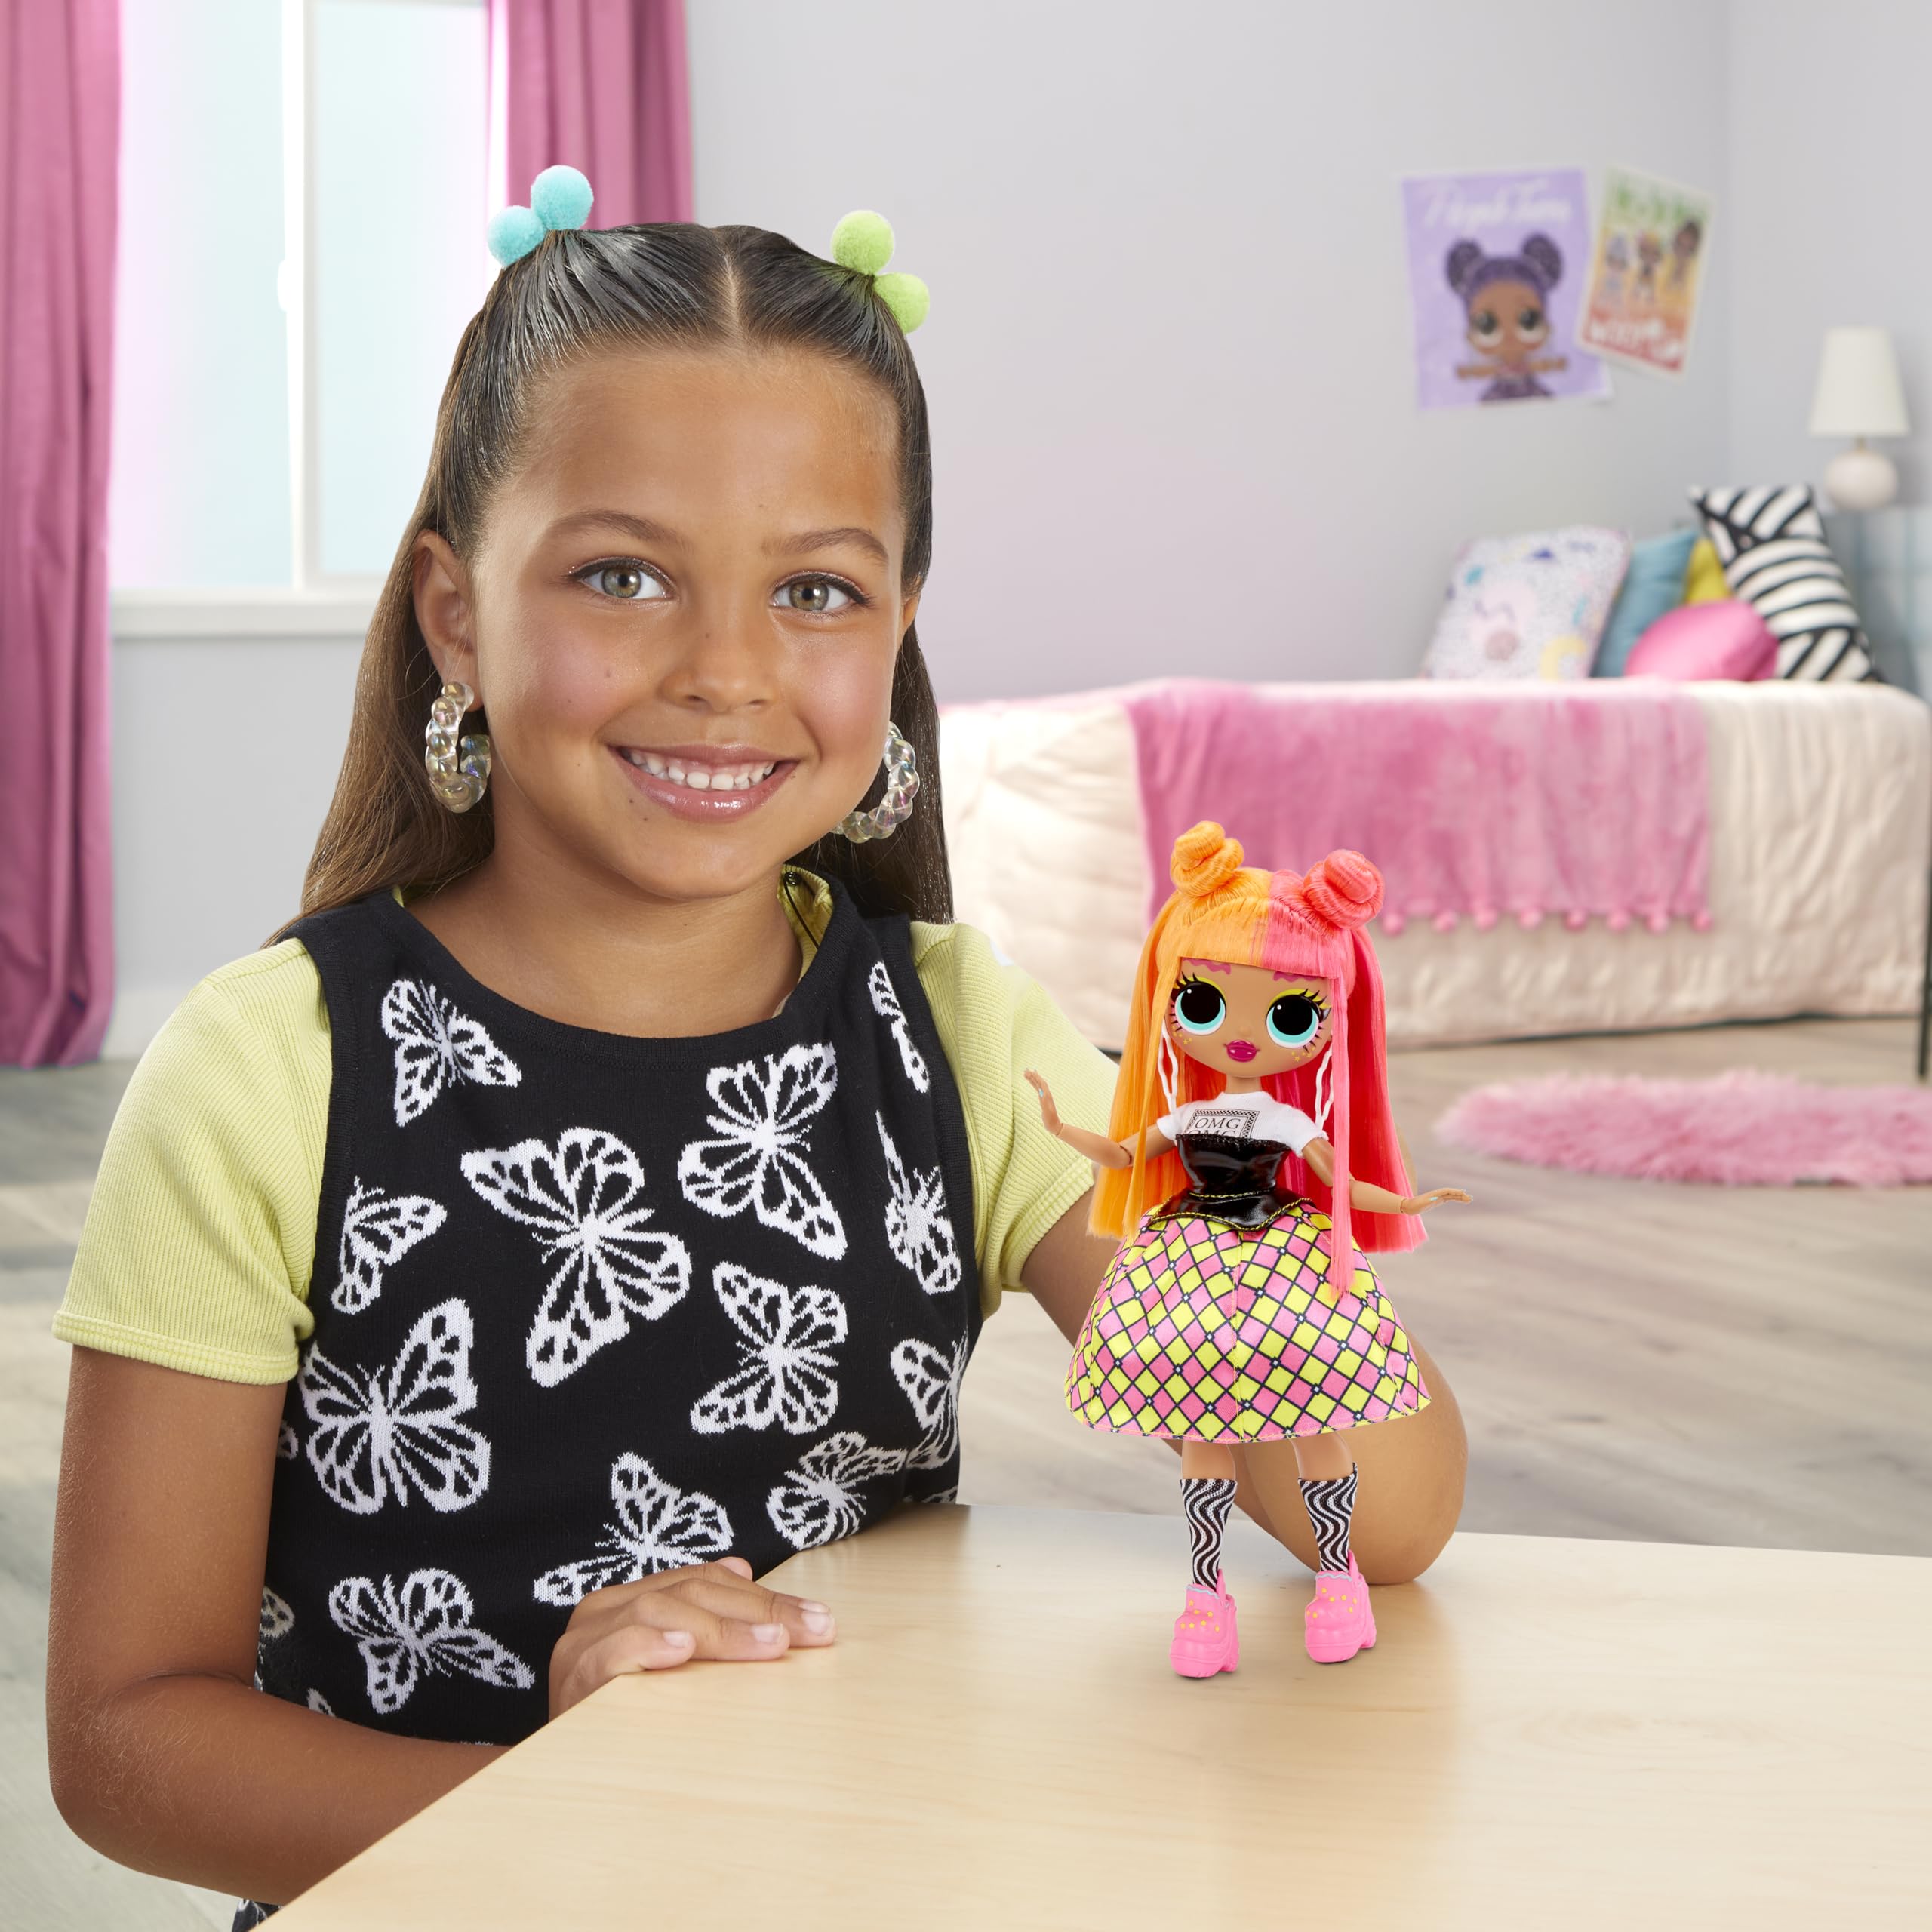 LOL Surprise OMG Neonlicious Fashion Doll with Multiple Surprises Including Transforming Fashions and Fabulous Accessories – Great Gift for Kids Ages 4+